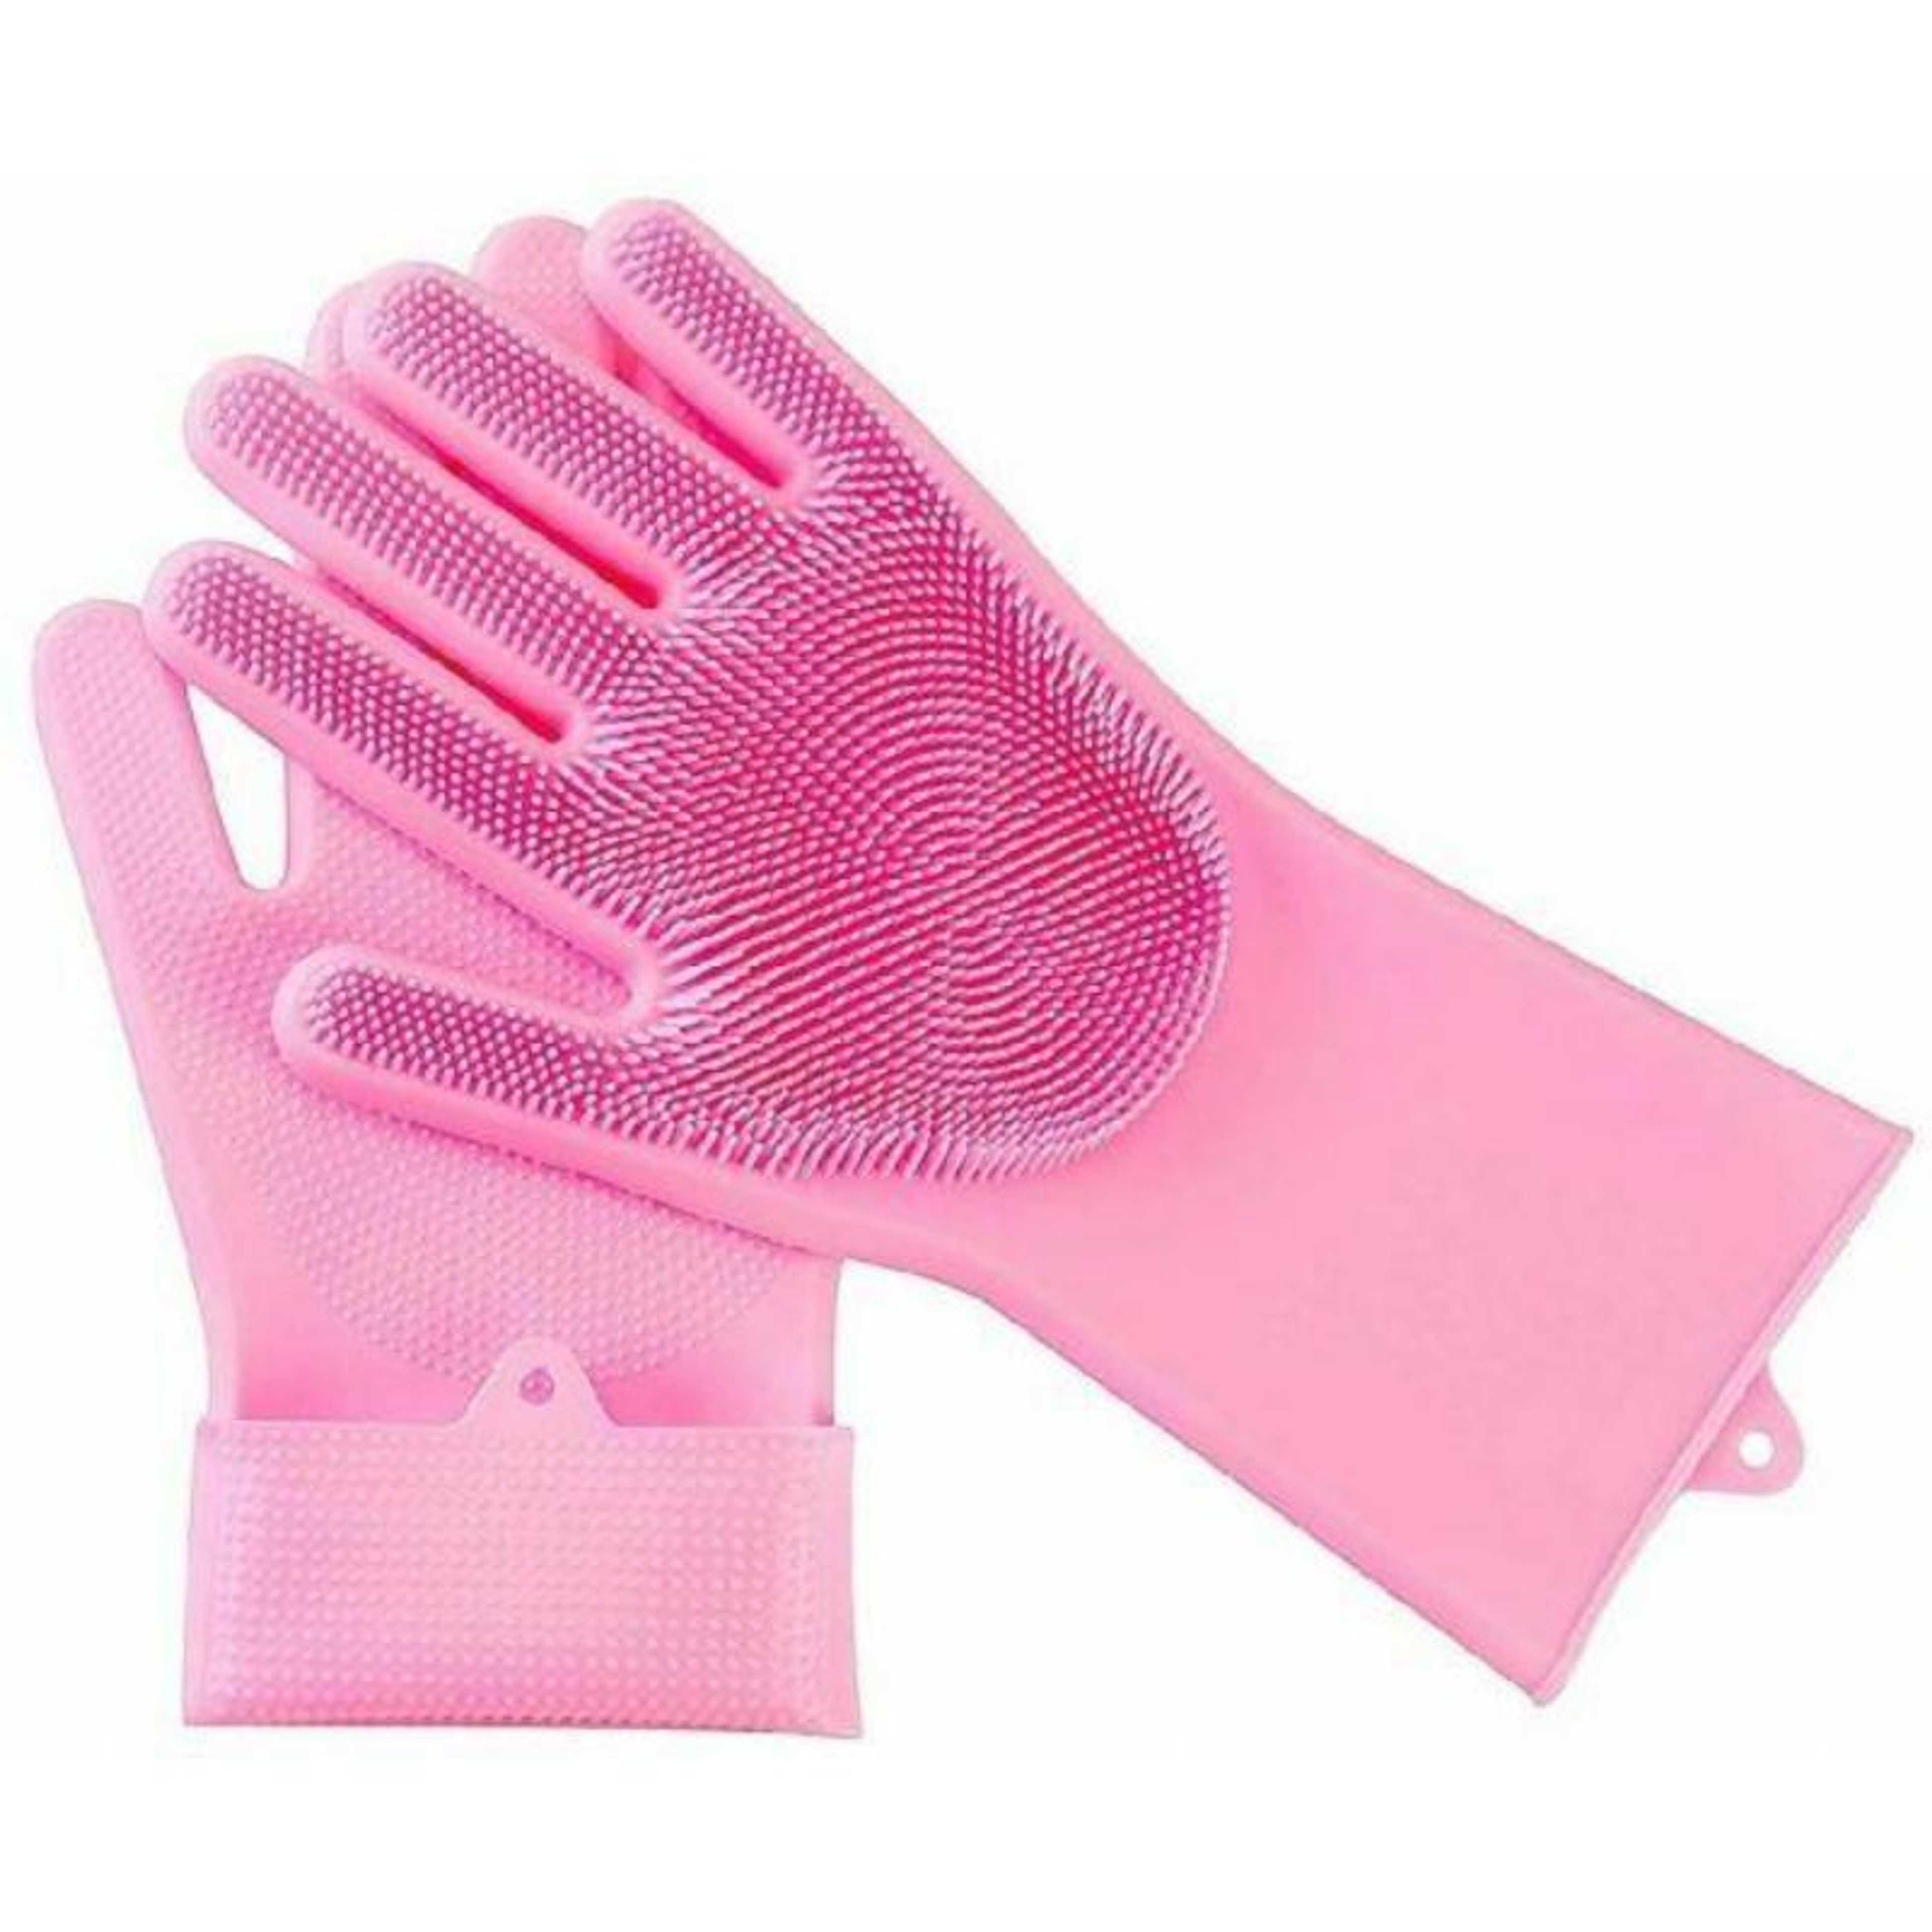 Silicone Dishwashing Gloves, Pair Of Rubber Scrubbing Gloves For Dishes, Wash Cleaning Gloves With Sponge Scrubbers For Washing Kitchen, Bathroom, Car